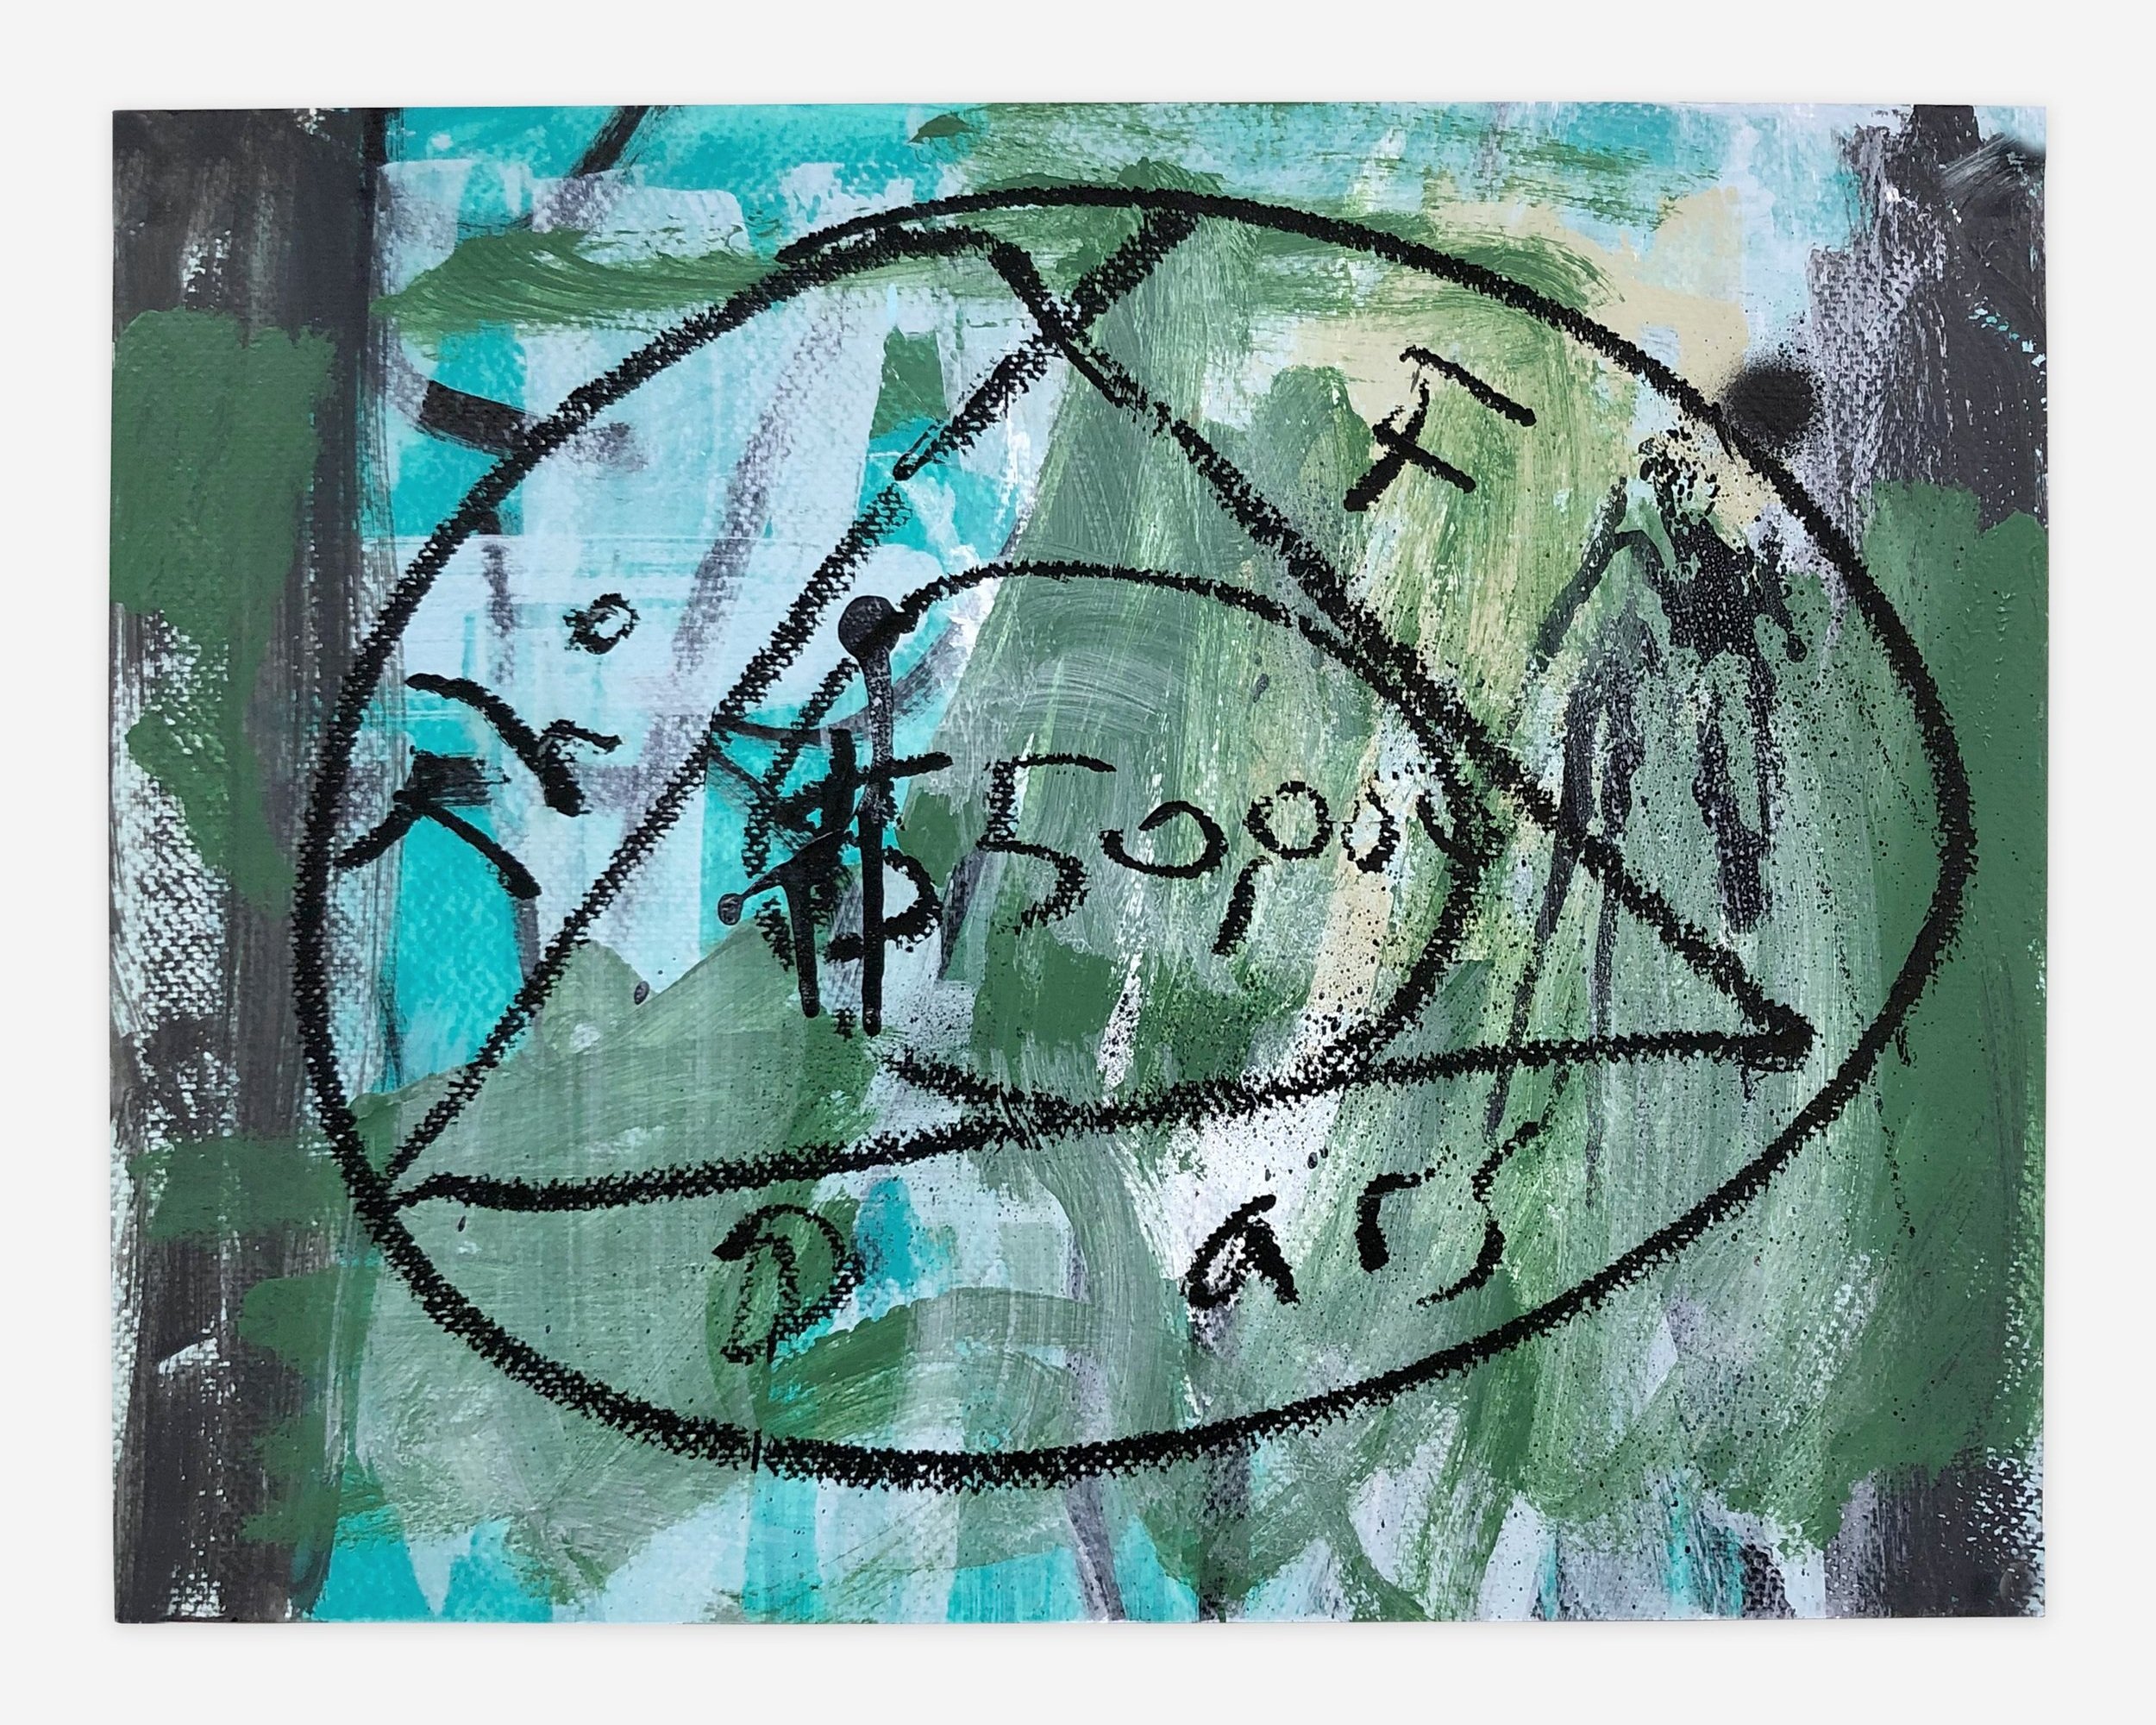   Untitled (051119a,)  mixed media on paper, 11" x 14", 2019   $160.00 includes US shipping     BUY NOW     